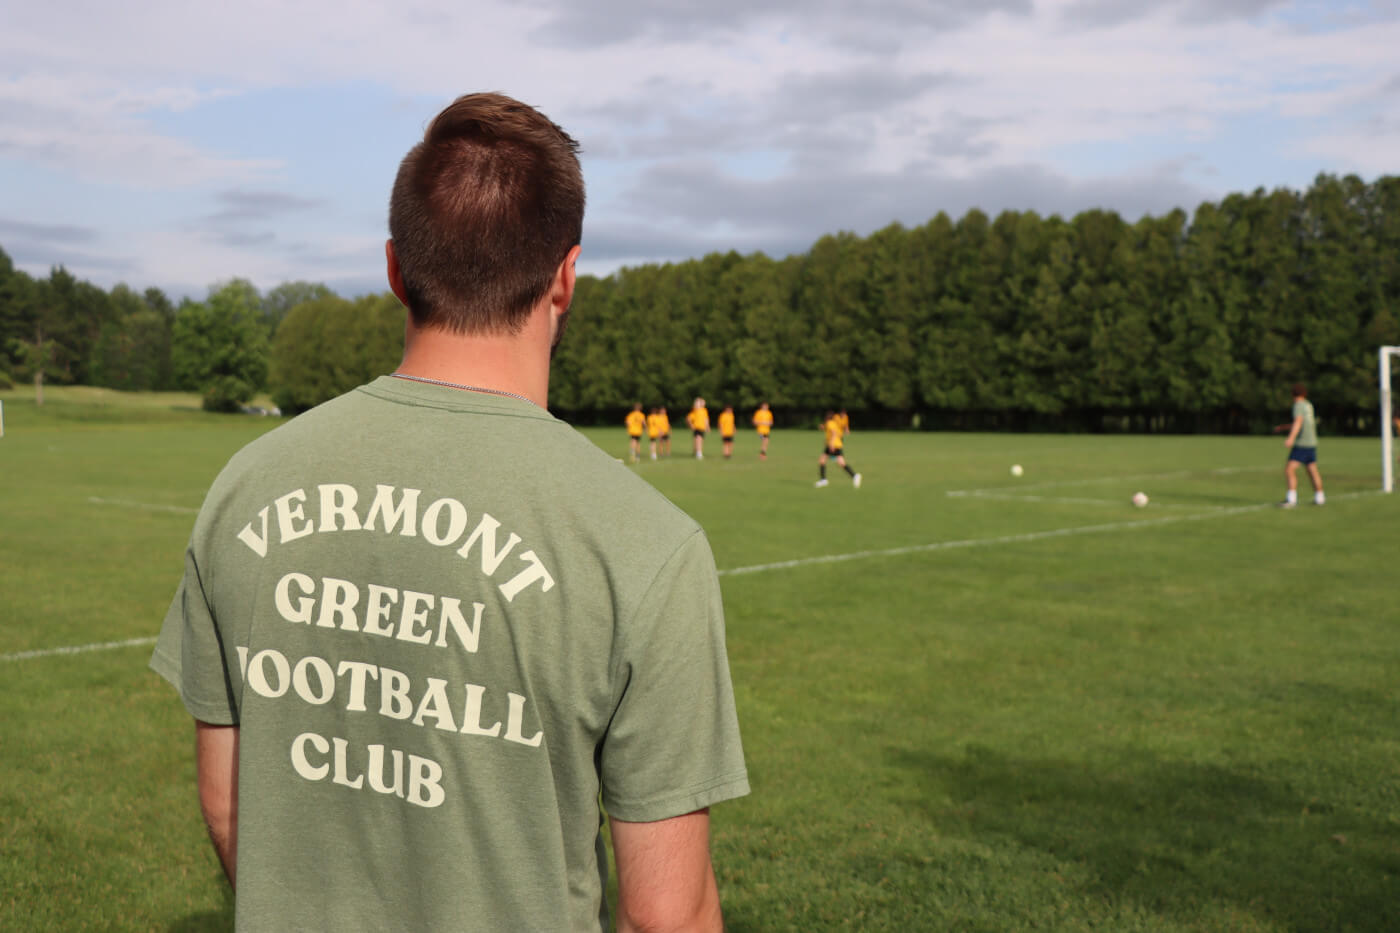 Vermont Green FC: Meet One of the World’s Greenest Soccer Clubs